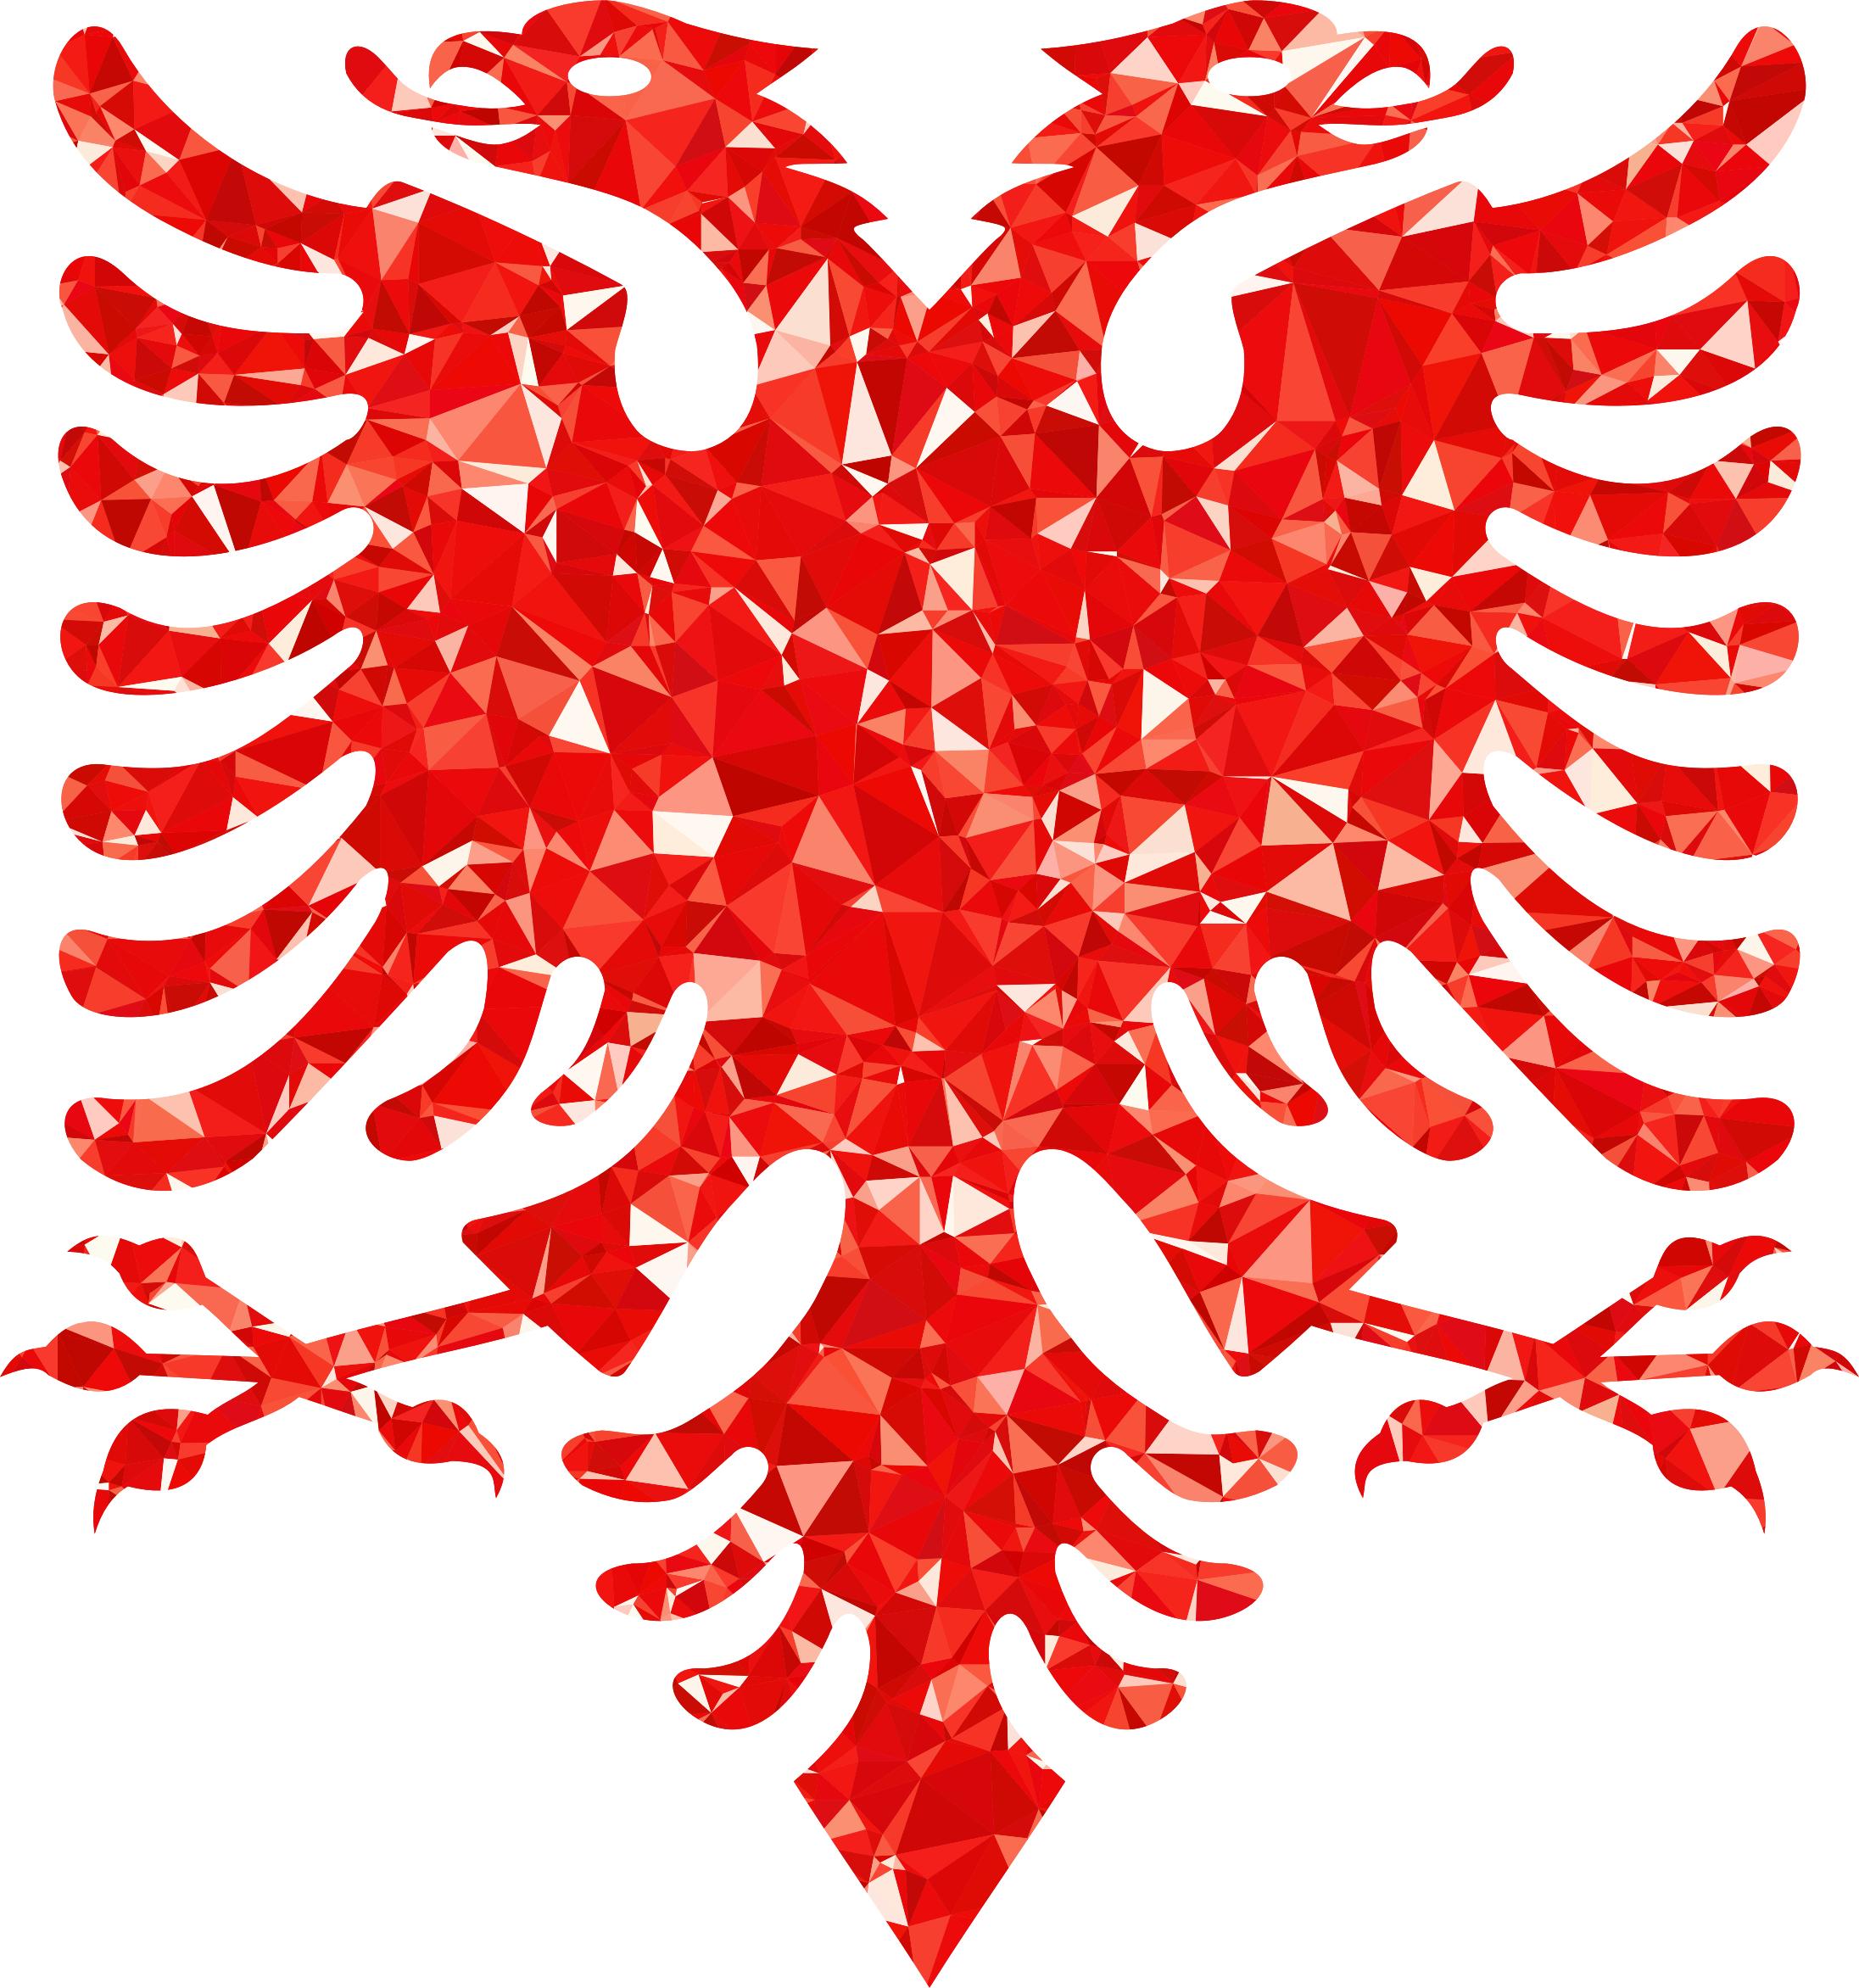 Two-Headed Red Eagle Logo - Ruby Double Headed Eagle Icon PNG PNG and Icon Downloads